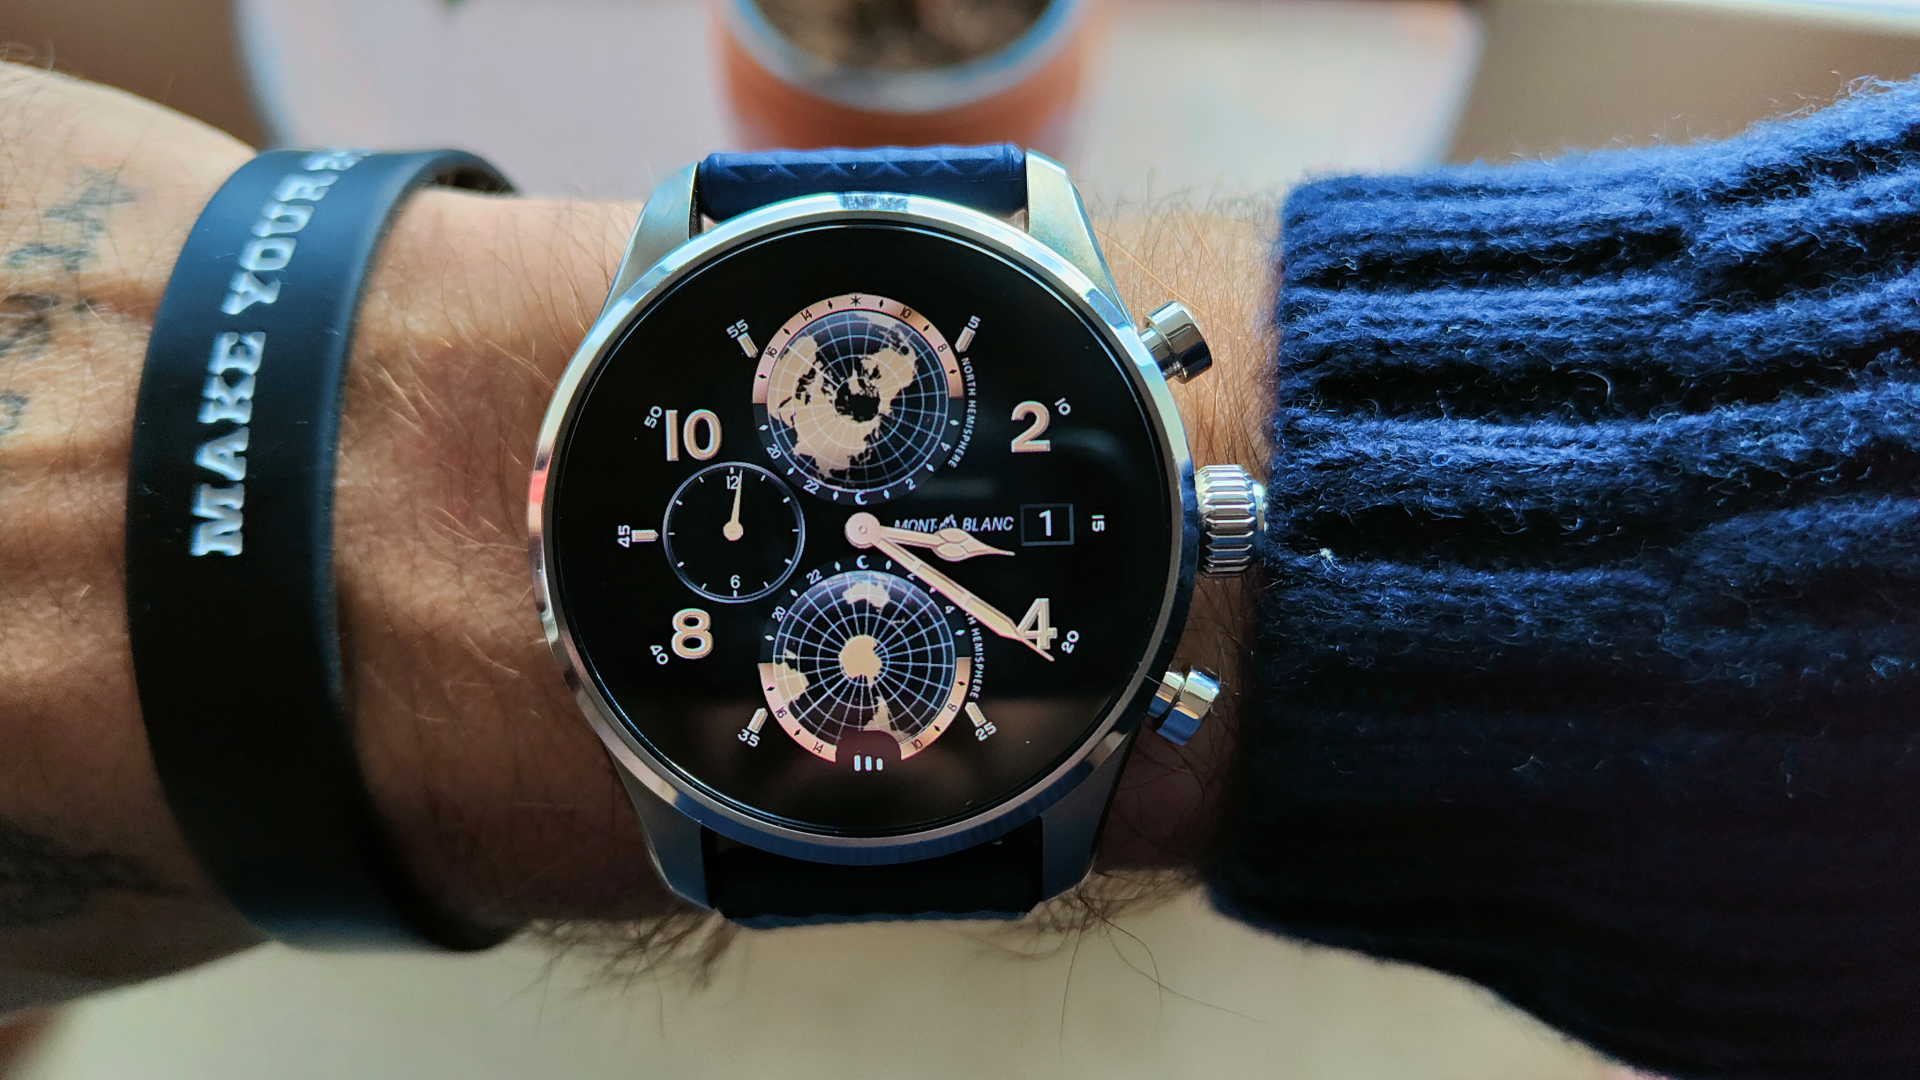 Are you surprised to see him wearing such a great watch? #watches